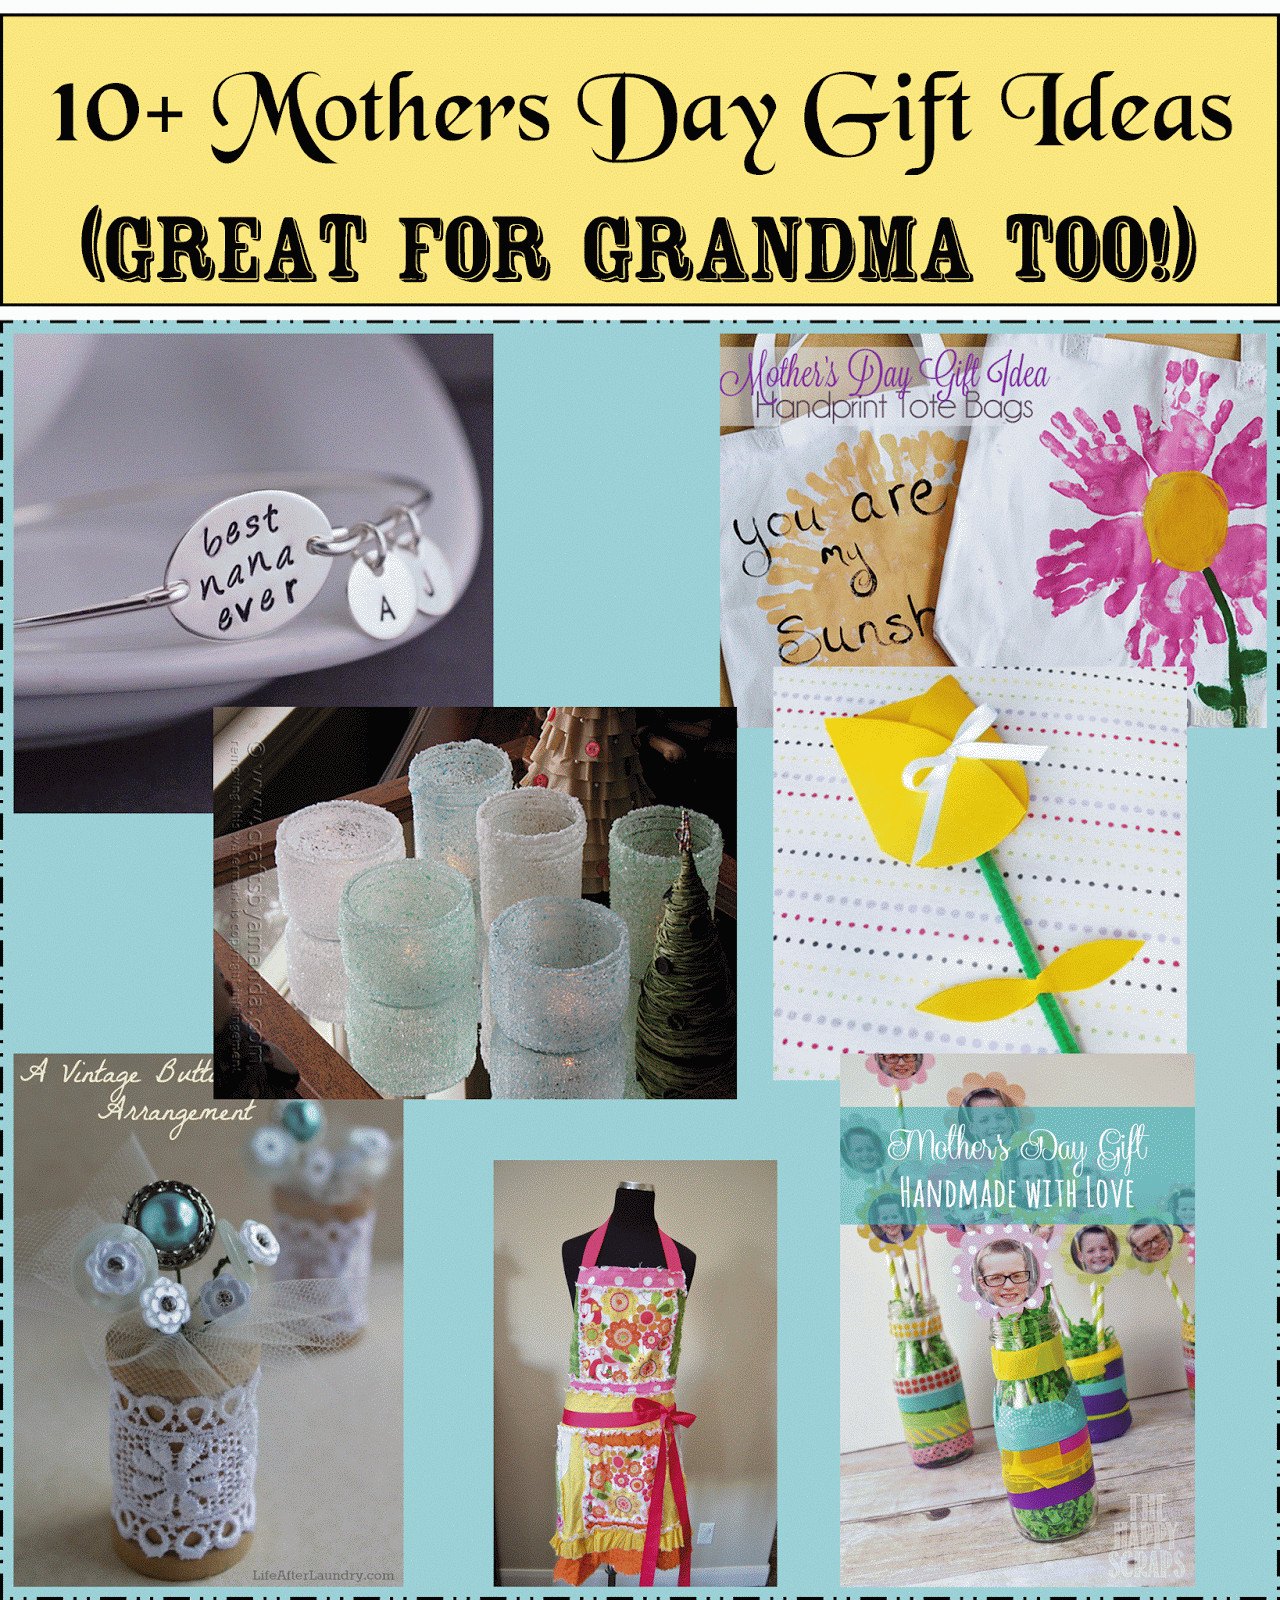 Great Gift Ideas For Mothers
 Mother Day Gifts Roundup Perfect for Grandma Too